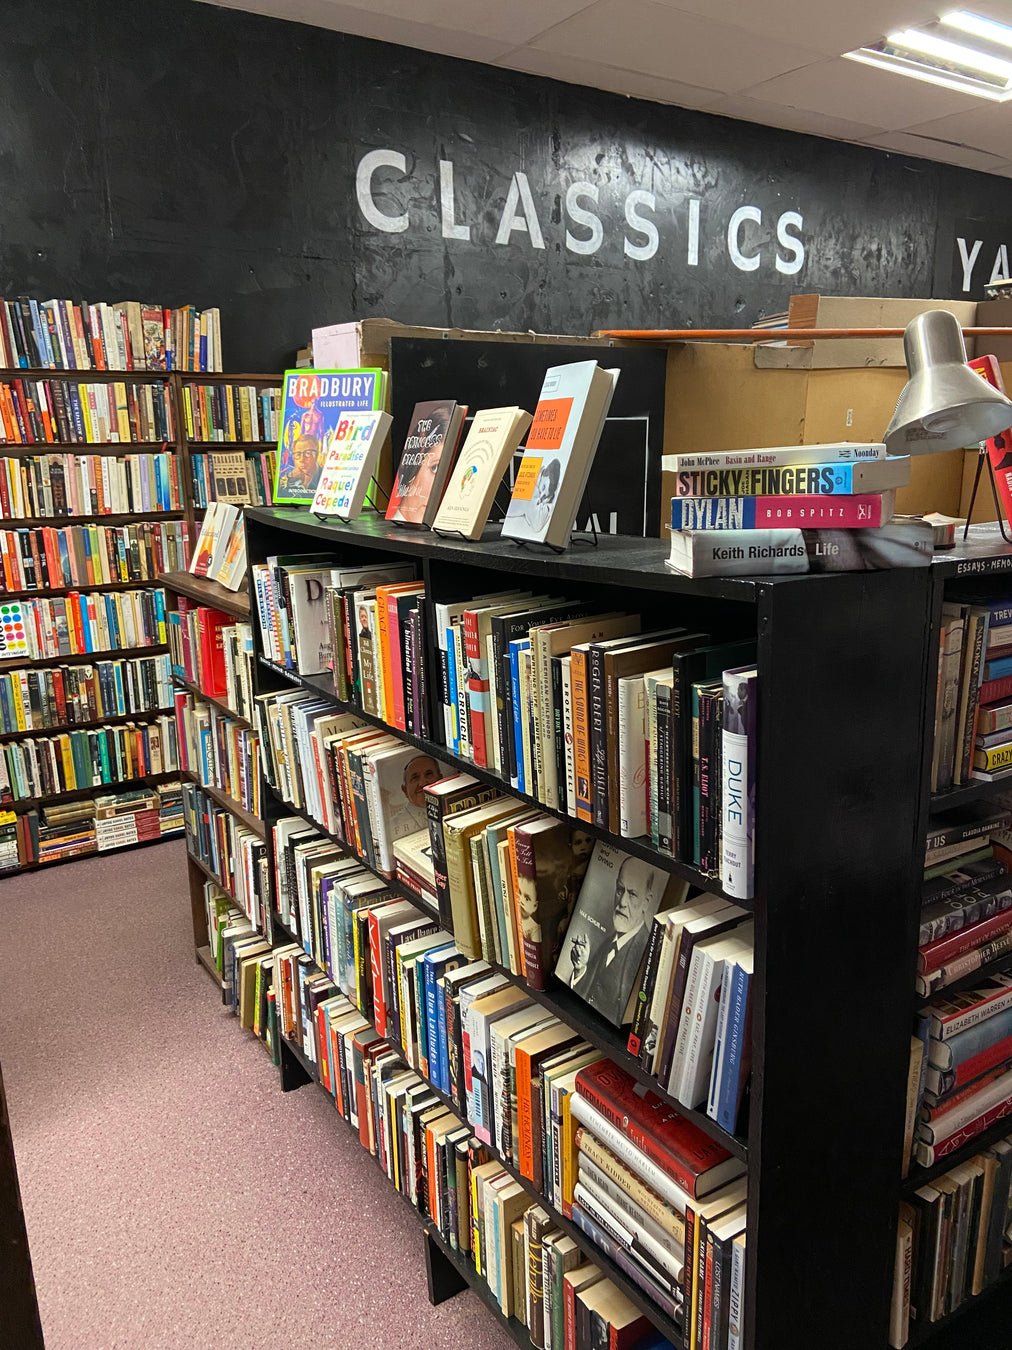 memoir section with classics sign